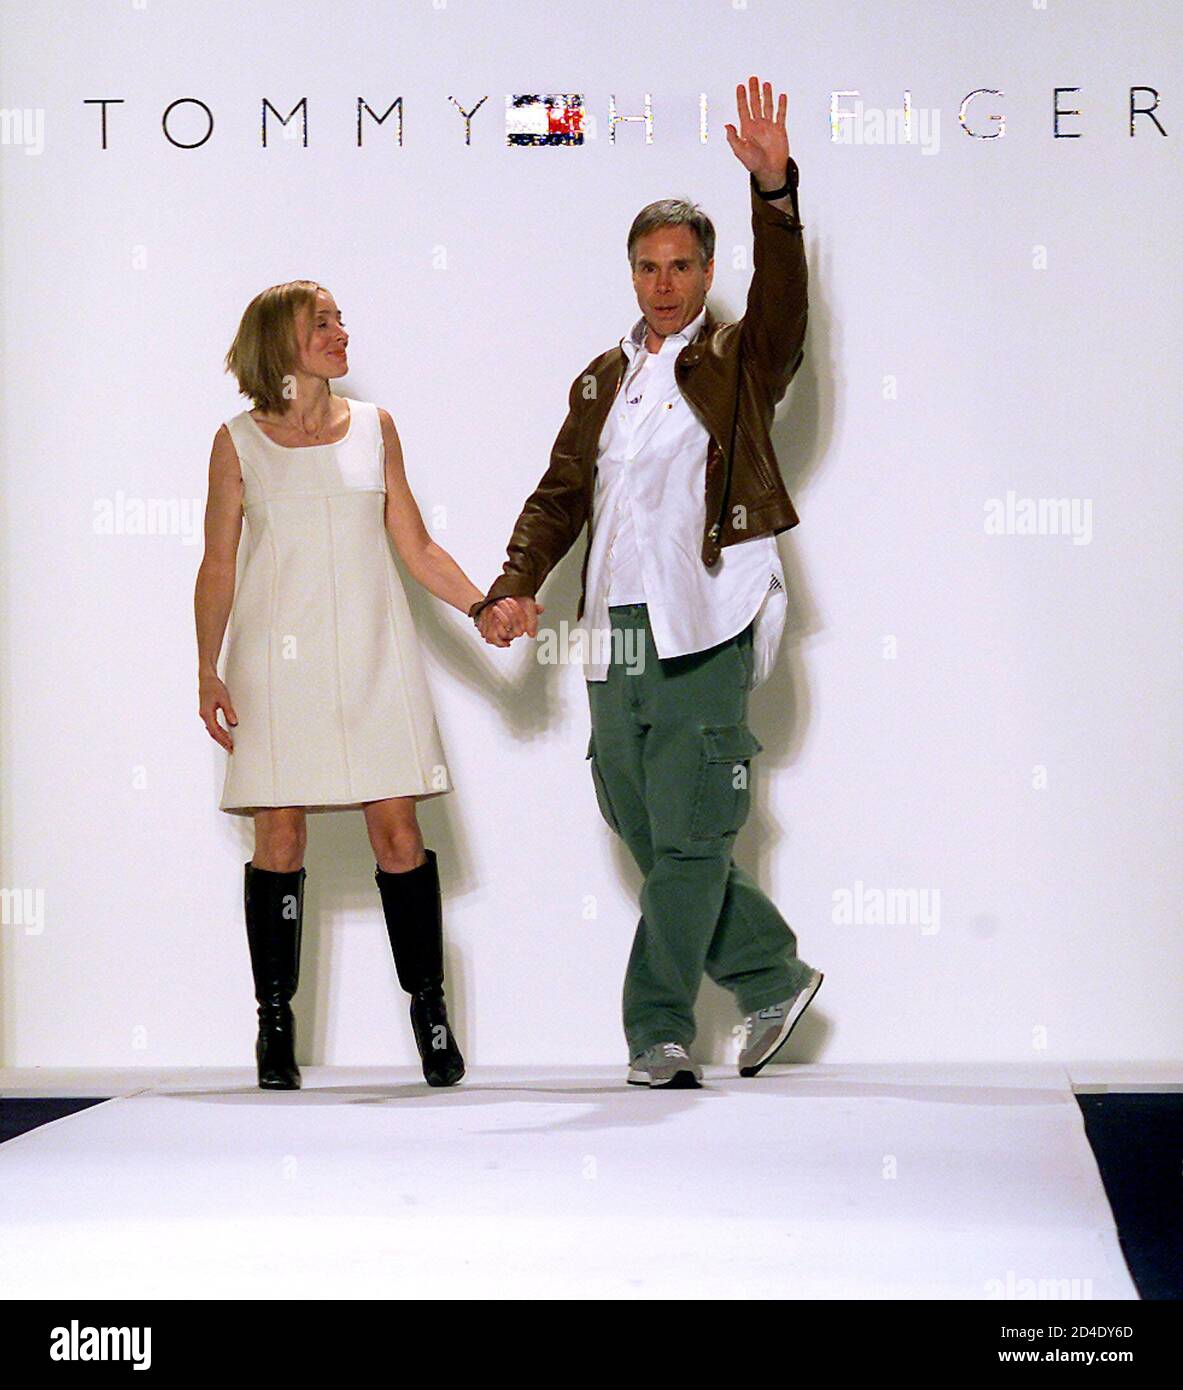 Designer Tommy Hilfiger waves to the audience as he and his sister Ginny  Hilfiger appear on the runway at the conclusion of the presentation of the Tommy  Hilfiger Fall/Winter 2002 Women's Collection